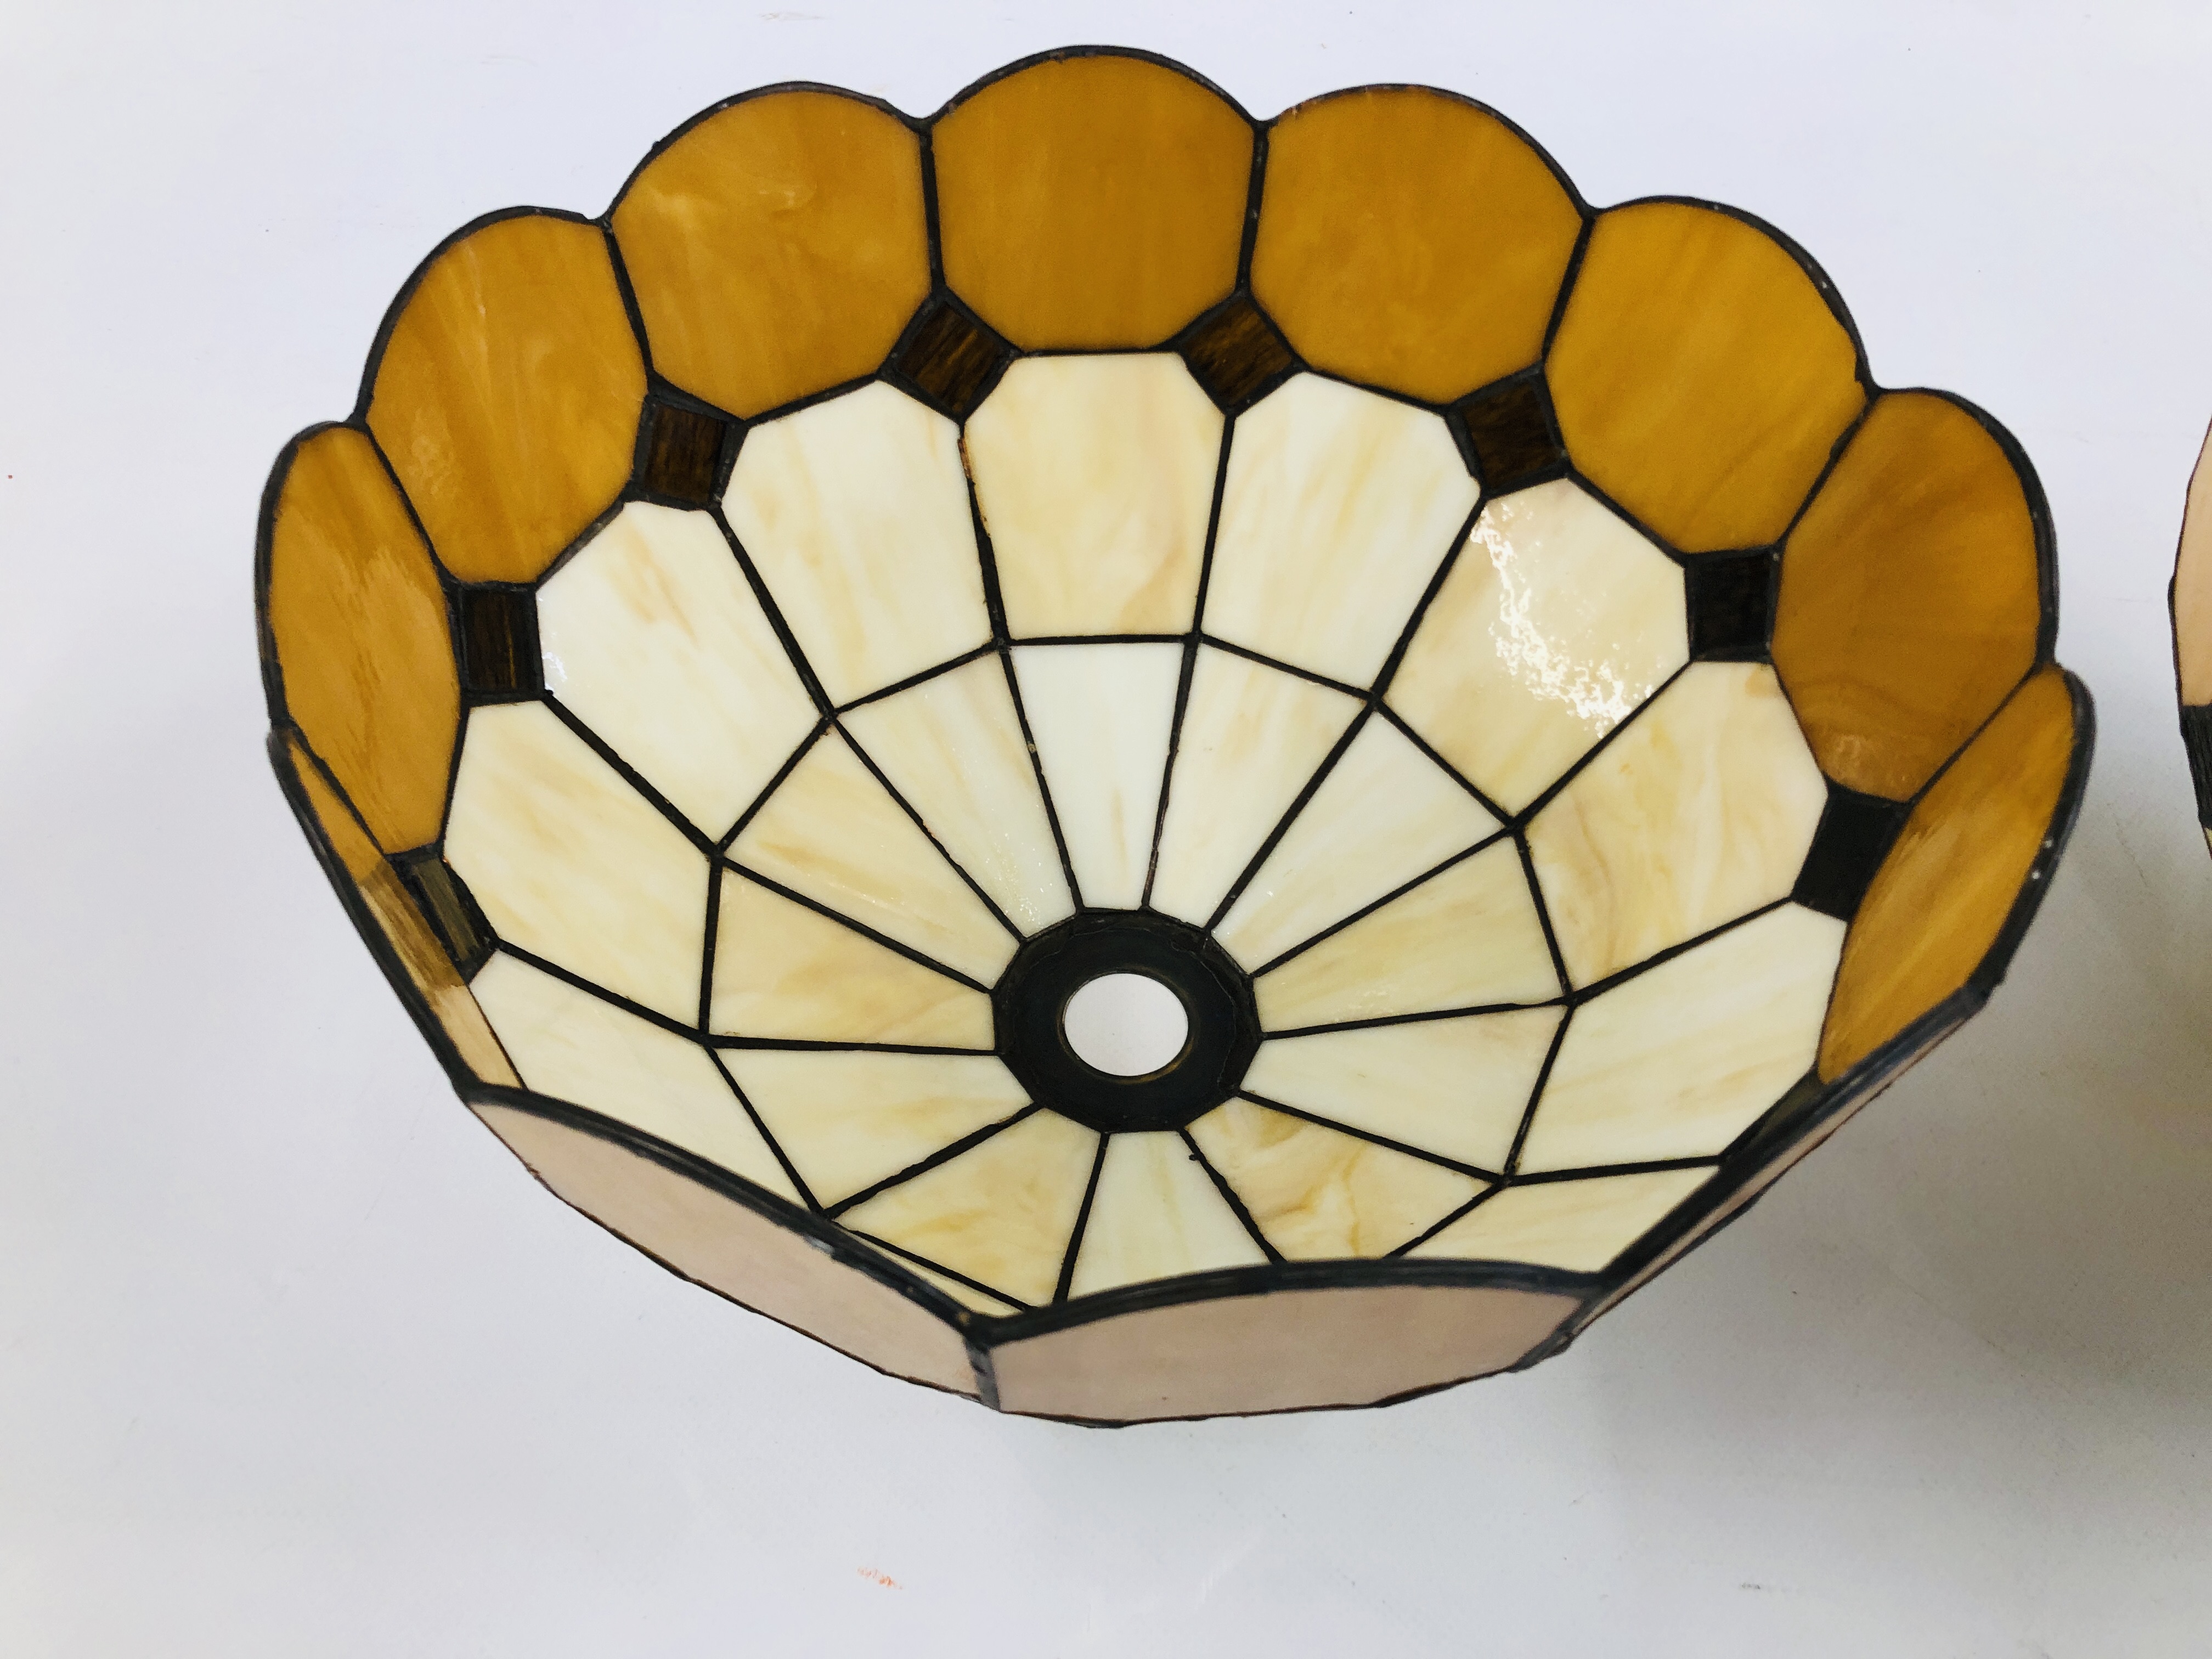 A PAIR OF TIFFANY STYLE LAMP SHADES. - Image 5 of 6